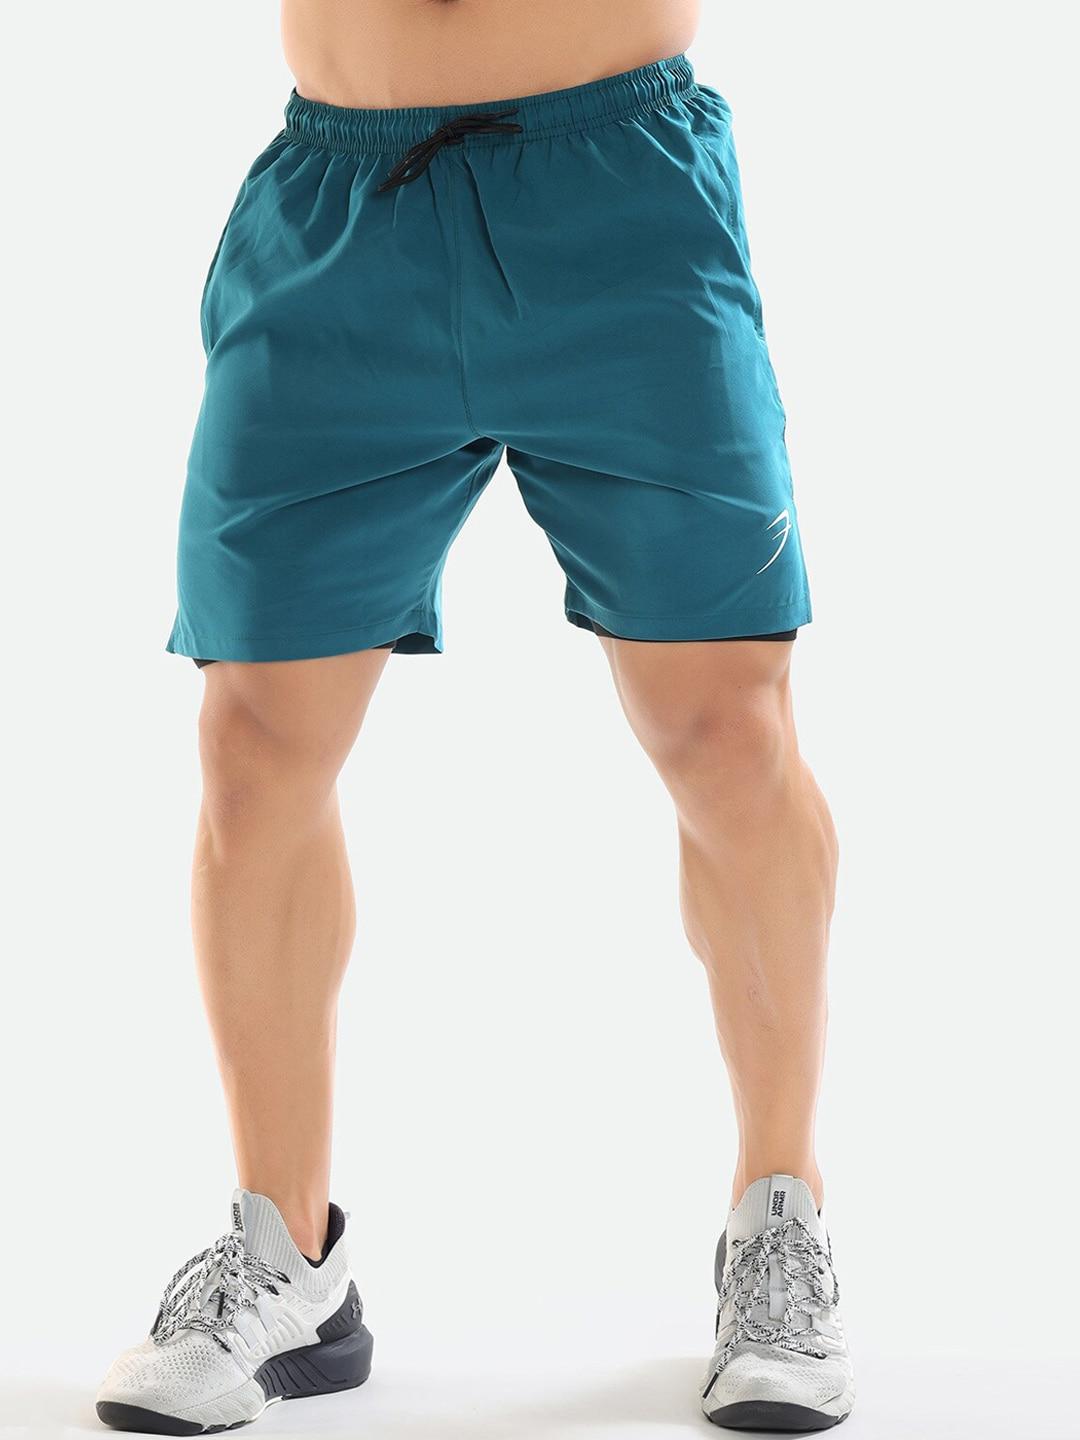 fuaark men teal skinny fit high-rise training or gym sports shorts with antimicrobial technology